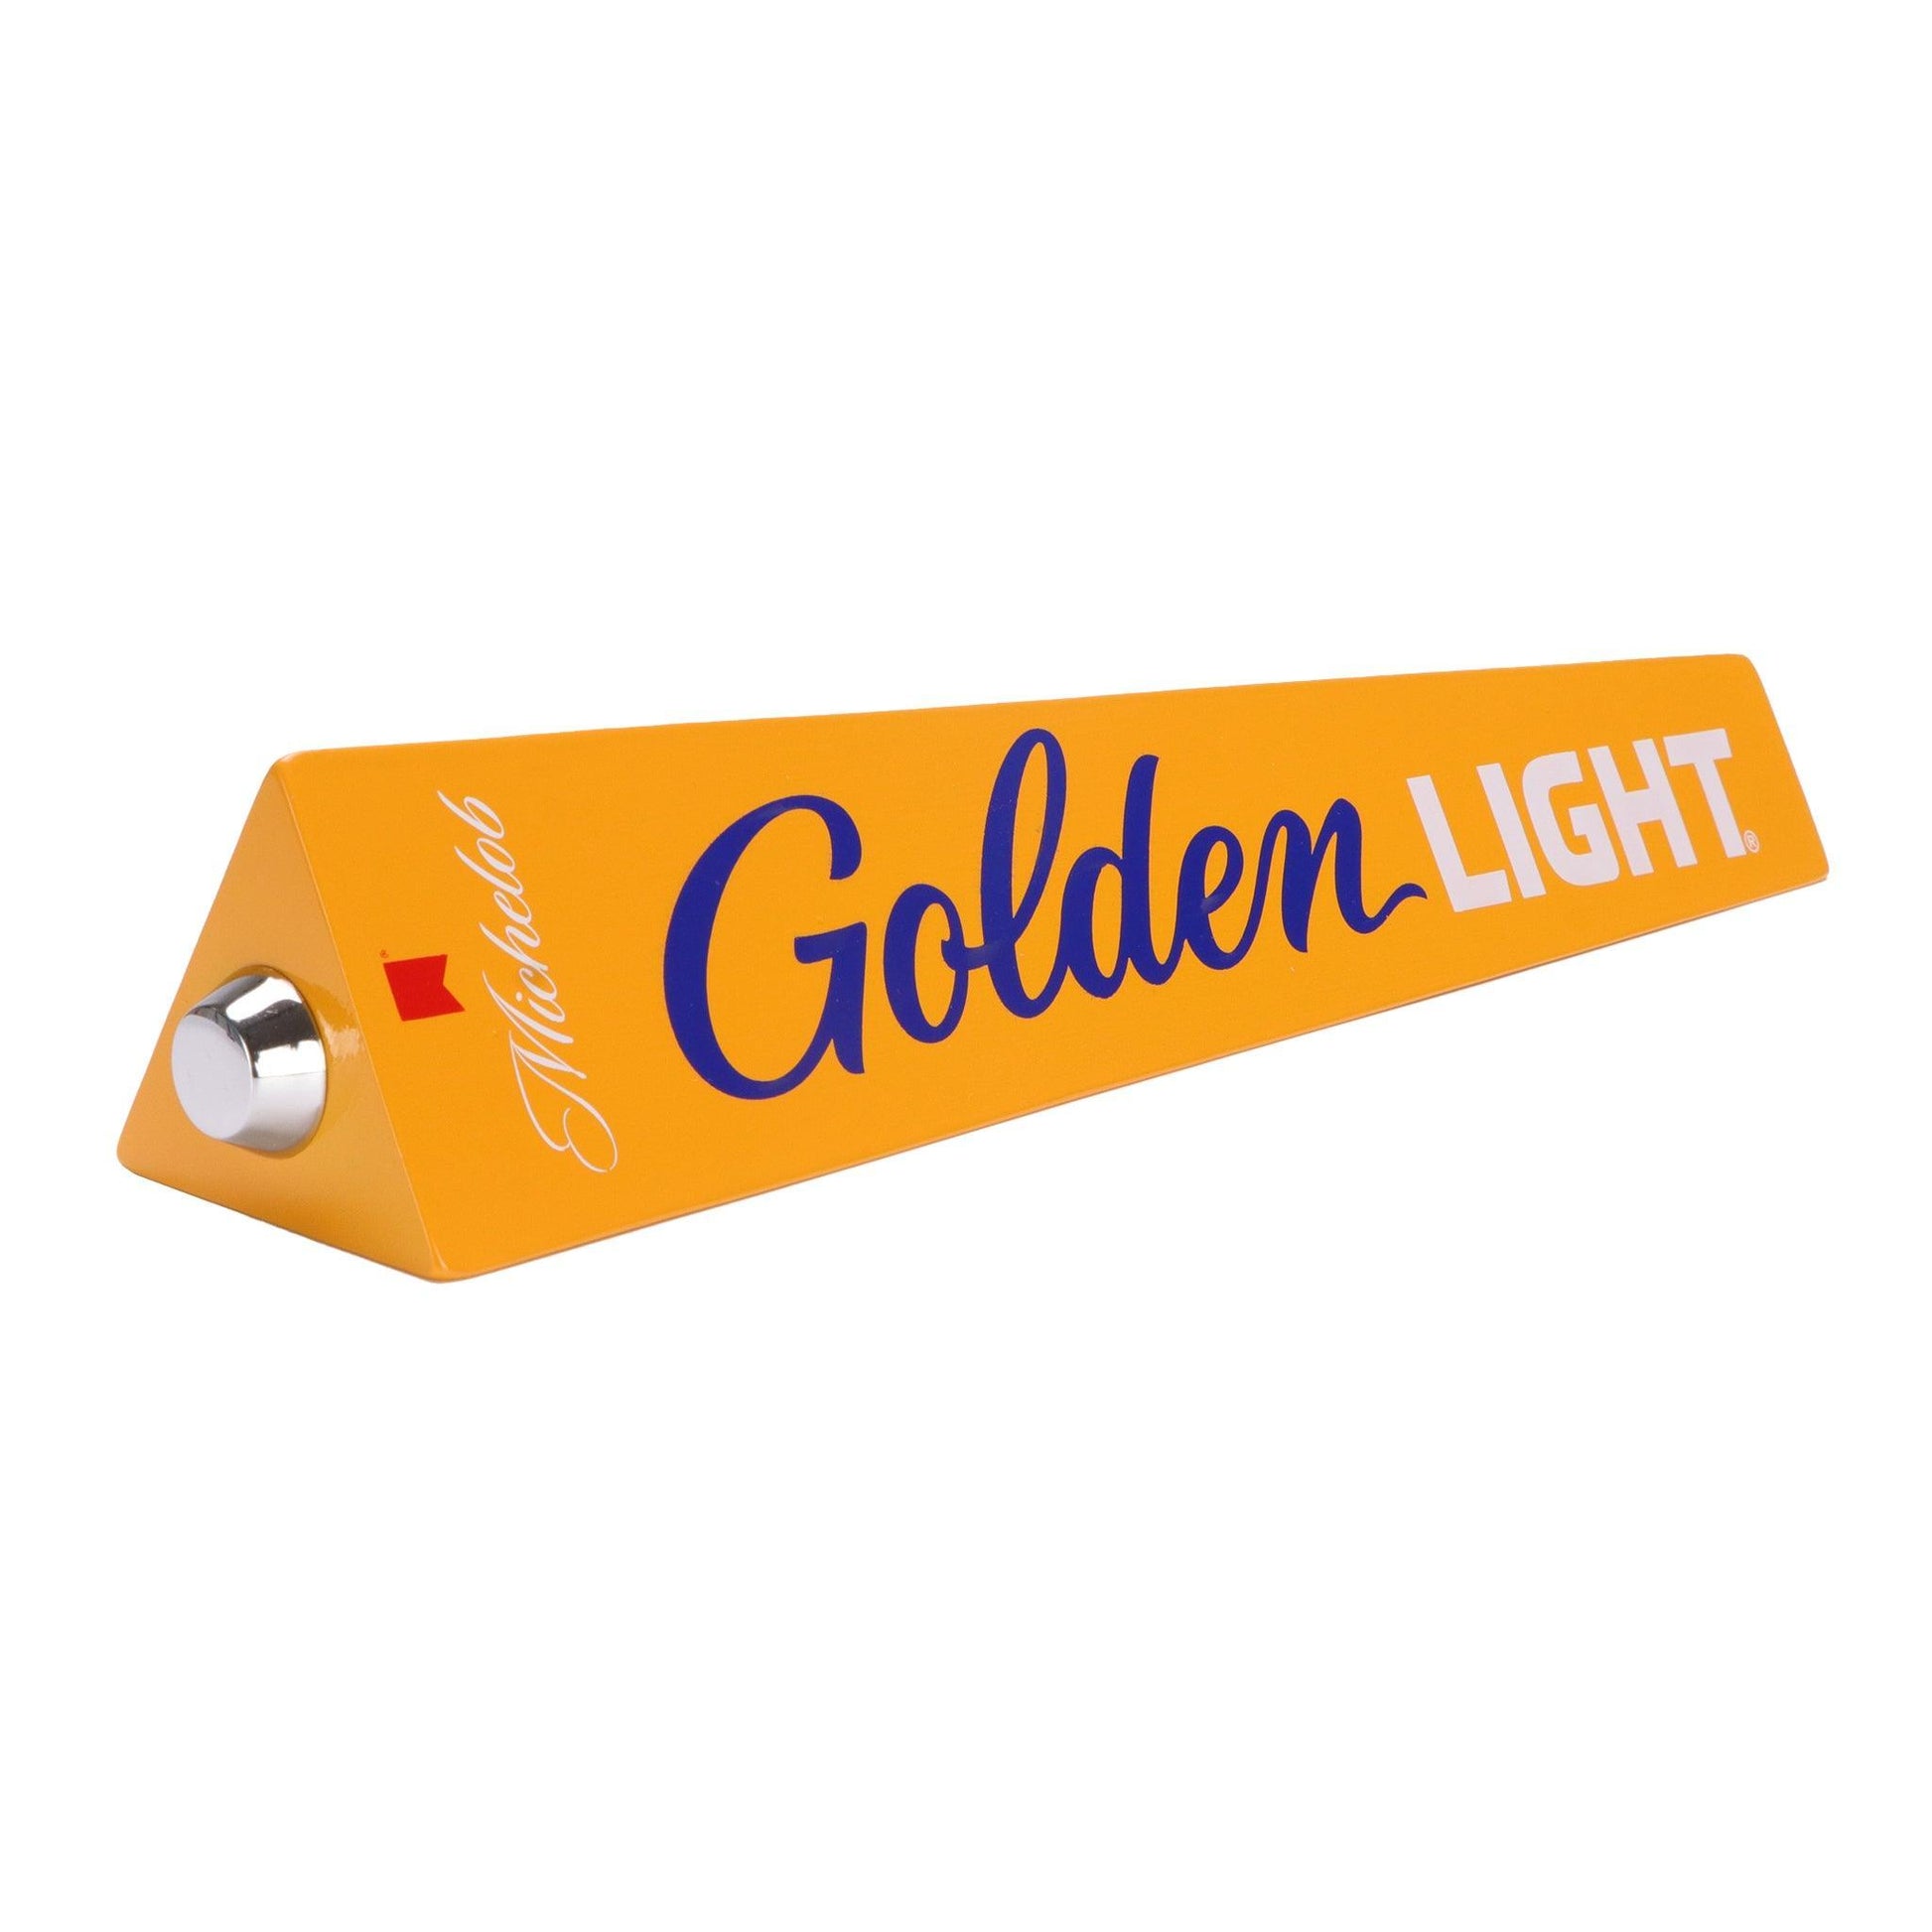 Michelob Golden Light gold tap handle - side angle